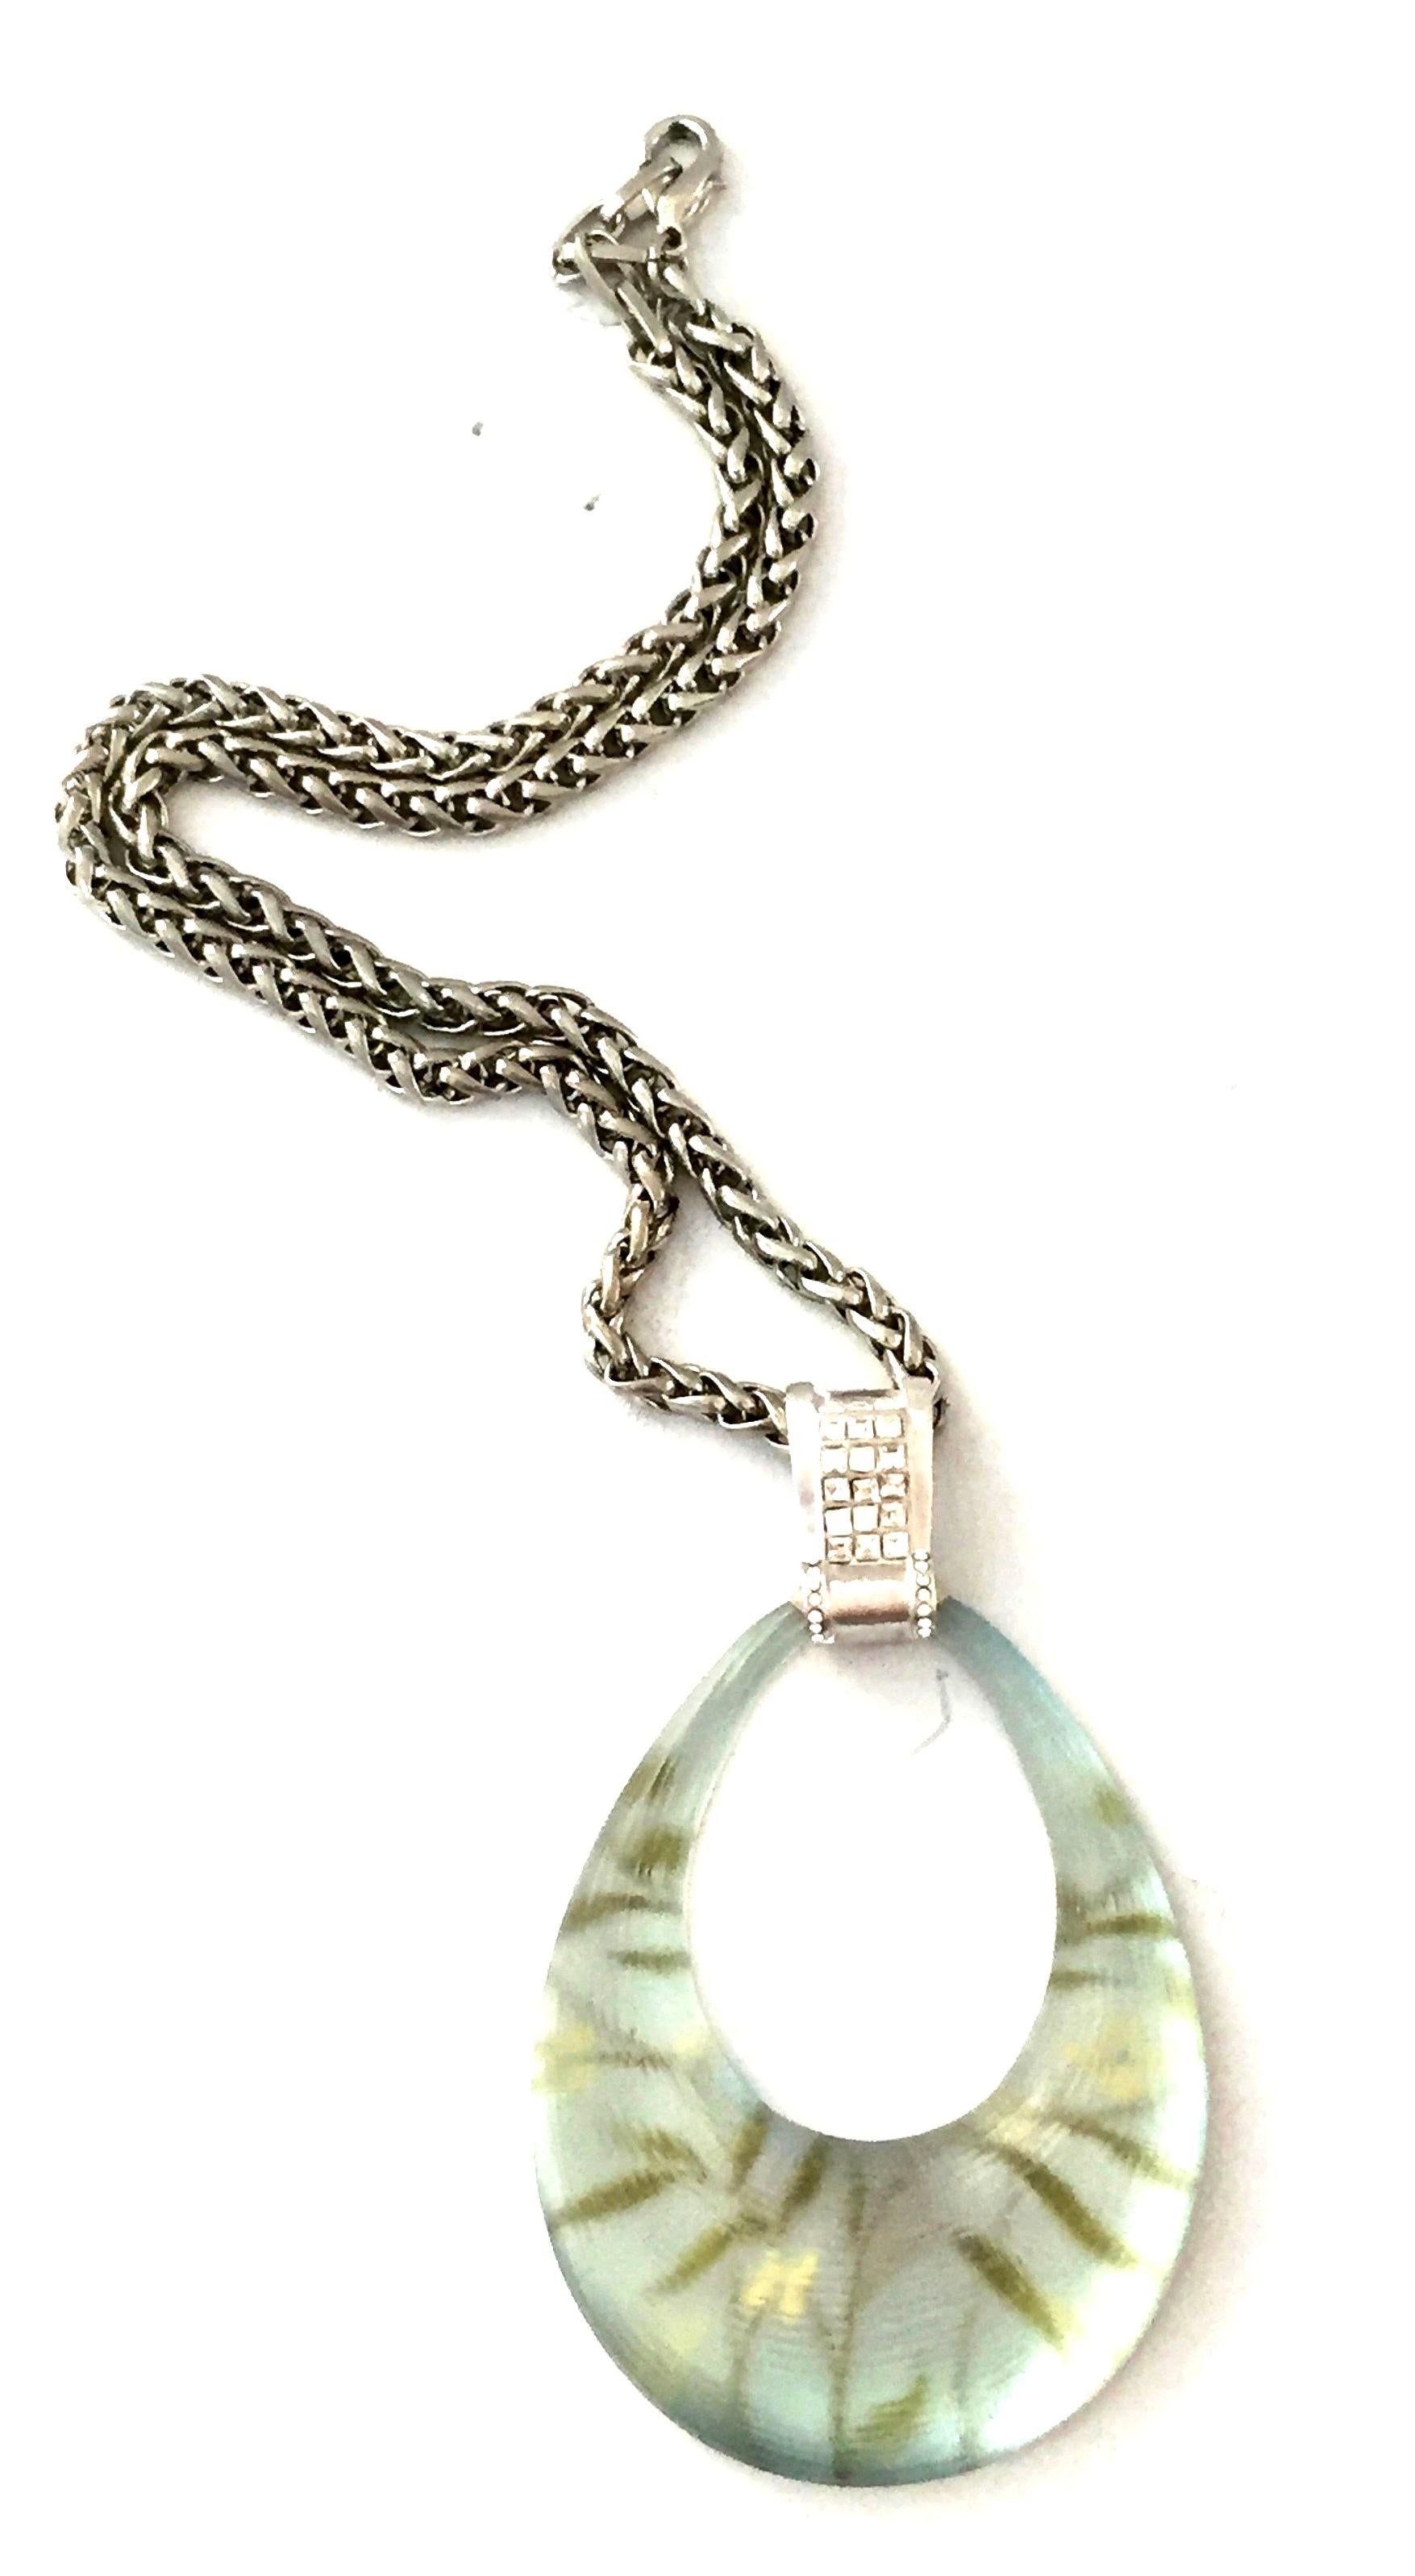 21st Century Modernist Brushed Silver, Swarovski Crystal & Lucite Pendant Necklace By, Alexis Bittar. Features a carved Lucite oval loop in mint green jungle print with brushed silver Swarovski crystal adorned bail and claw closure on a silver